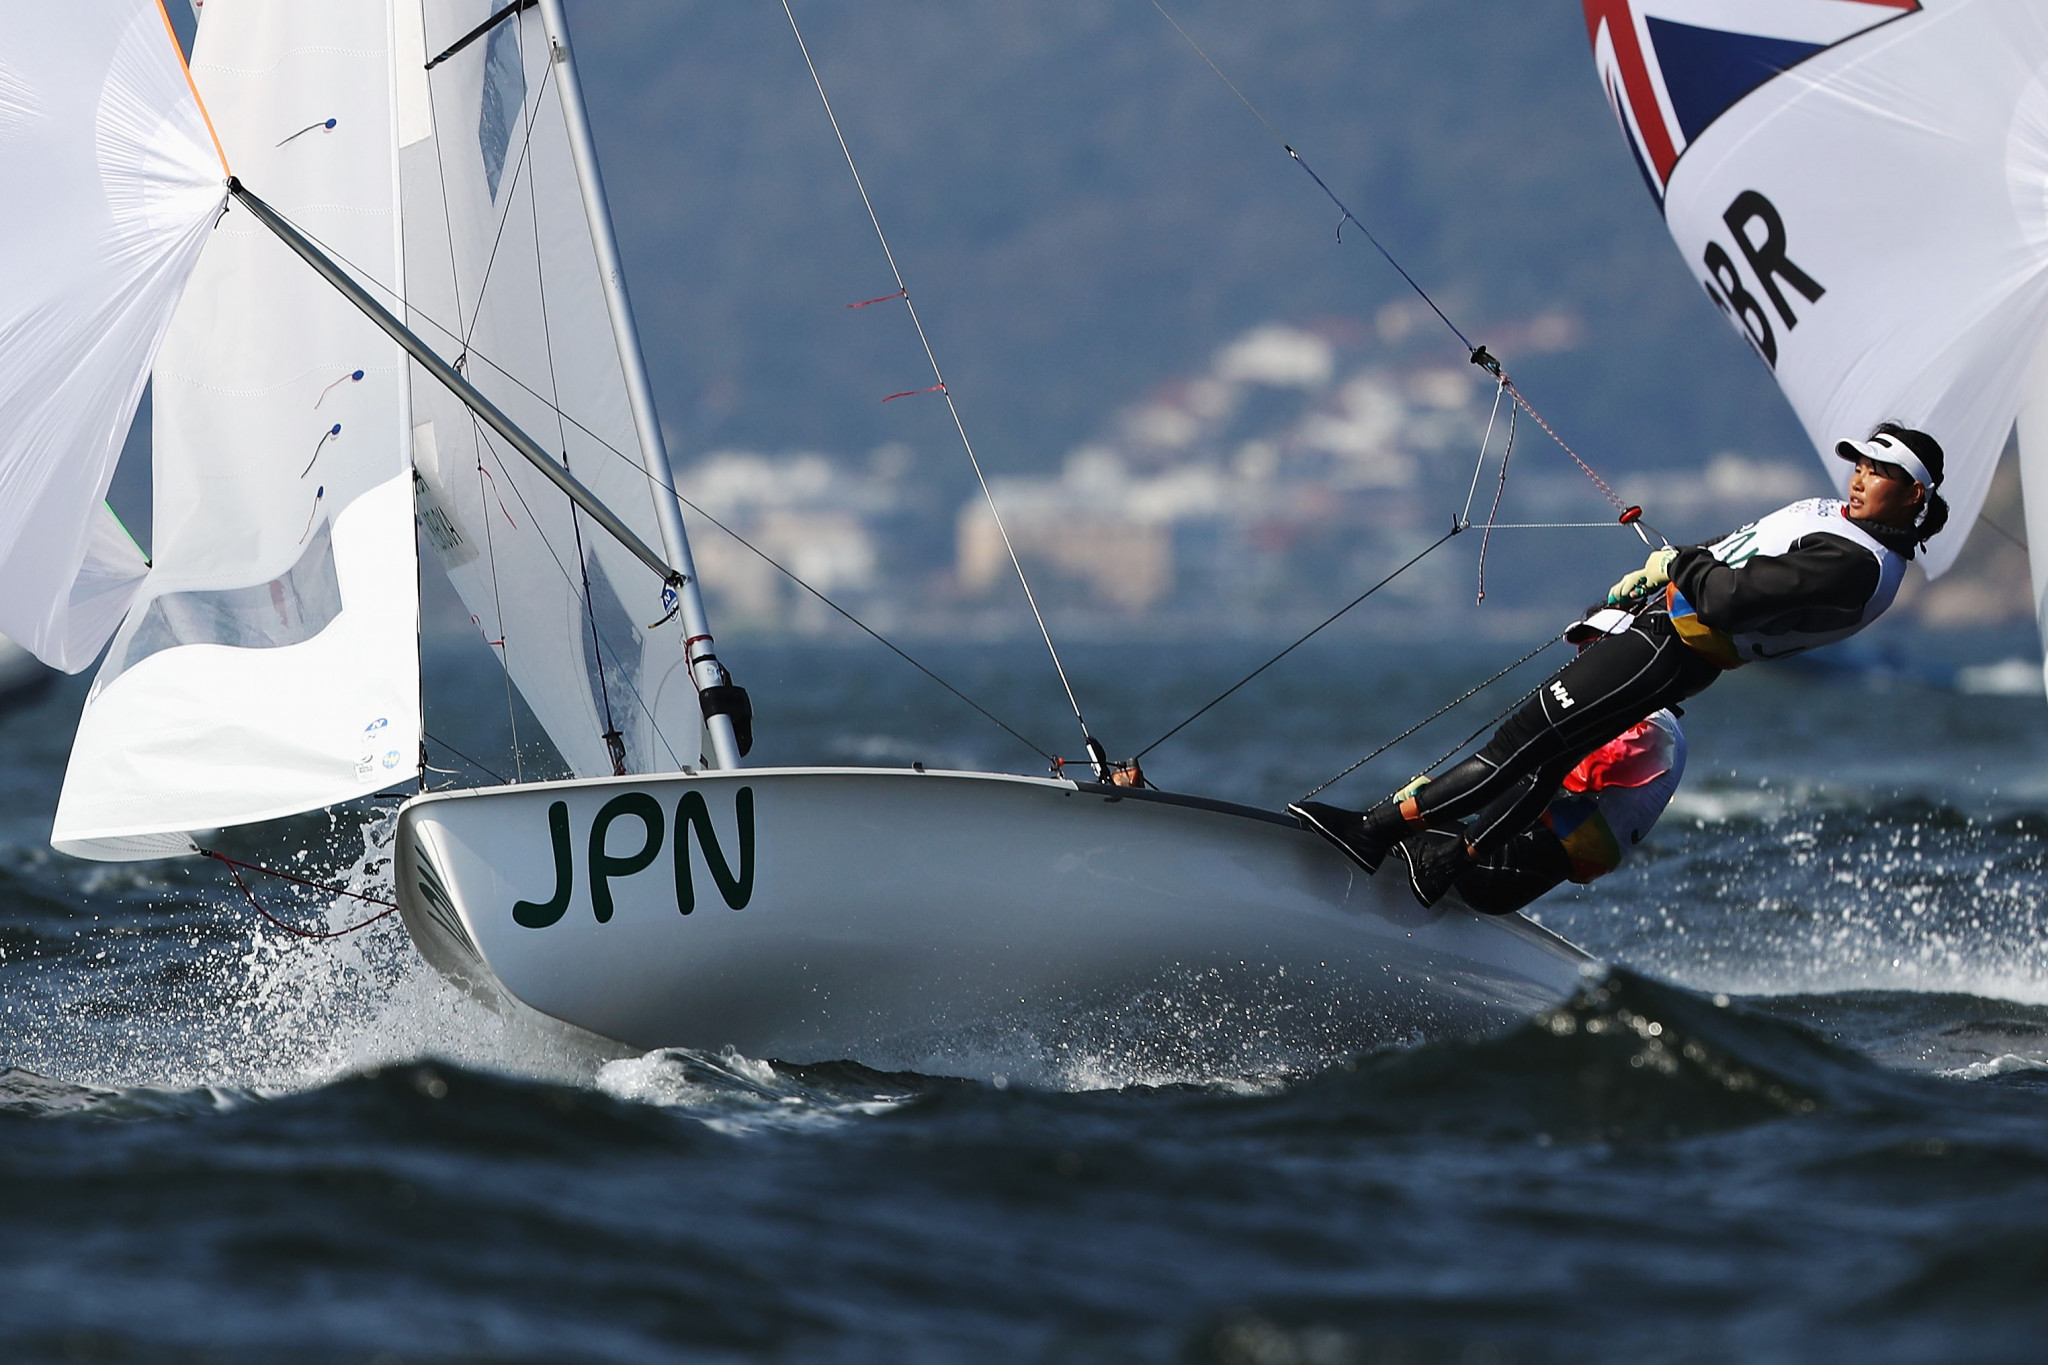 Home favourites and defending champions Ai Kondo Yoshida and Miho Yoshioka are leading the women’s event standings after day two of racing at the 470 World Championships on Enoshima Bay in Japan ©Getty Images